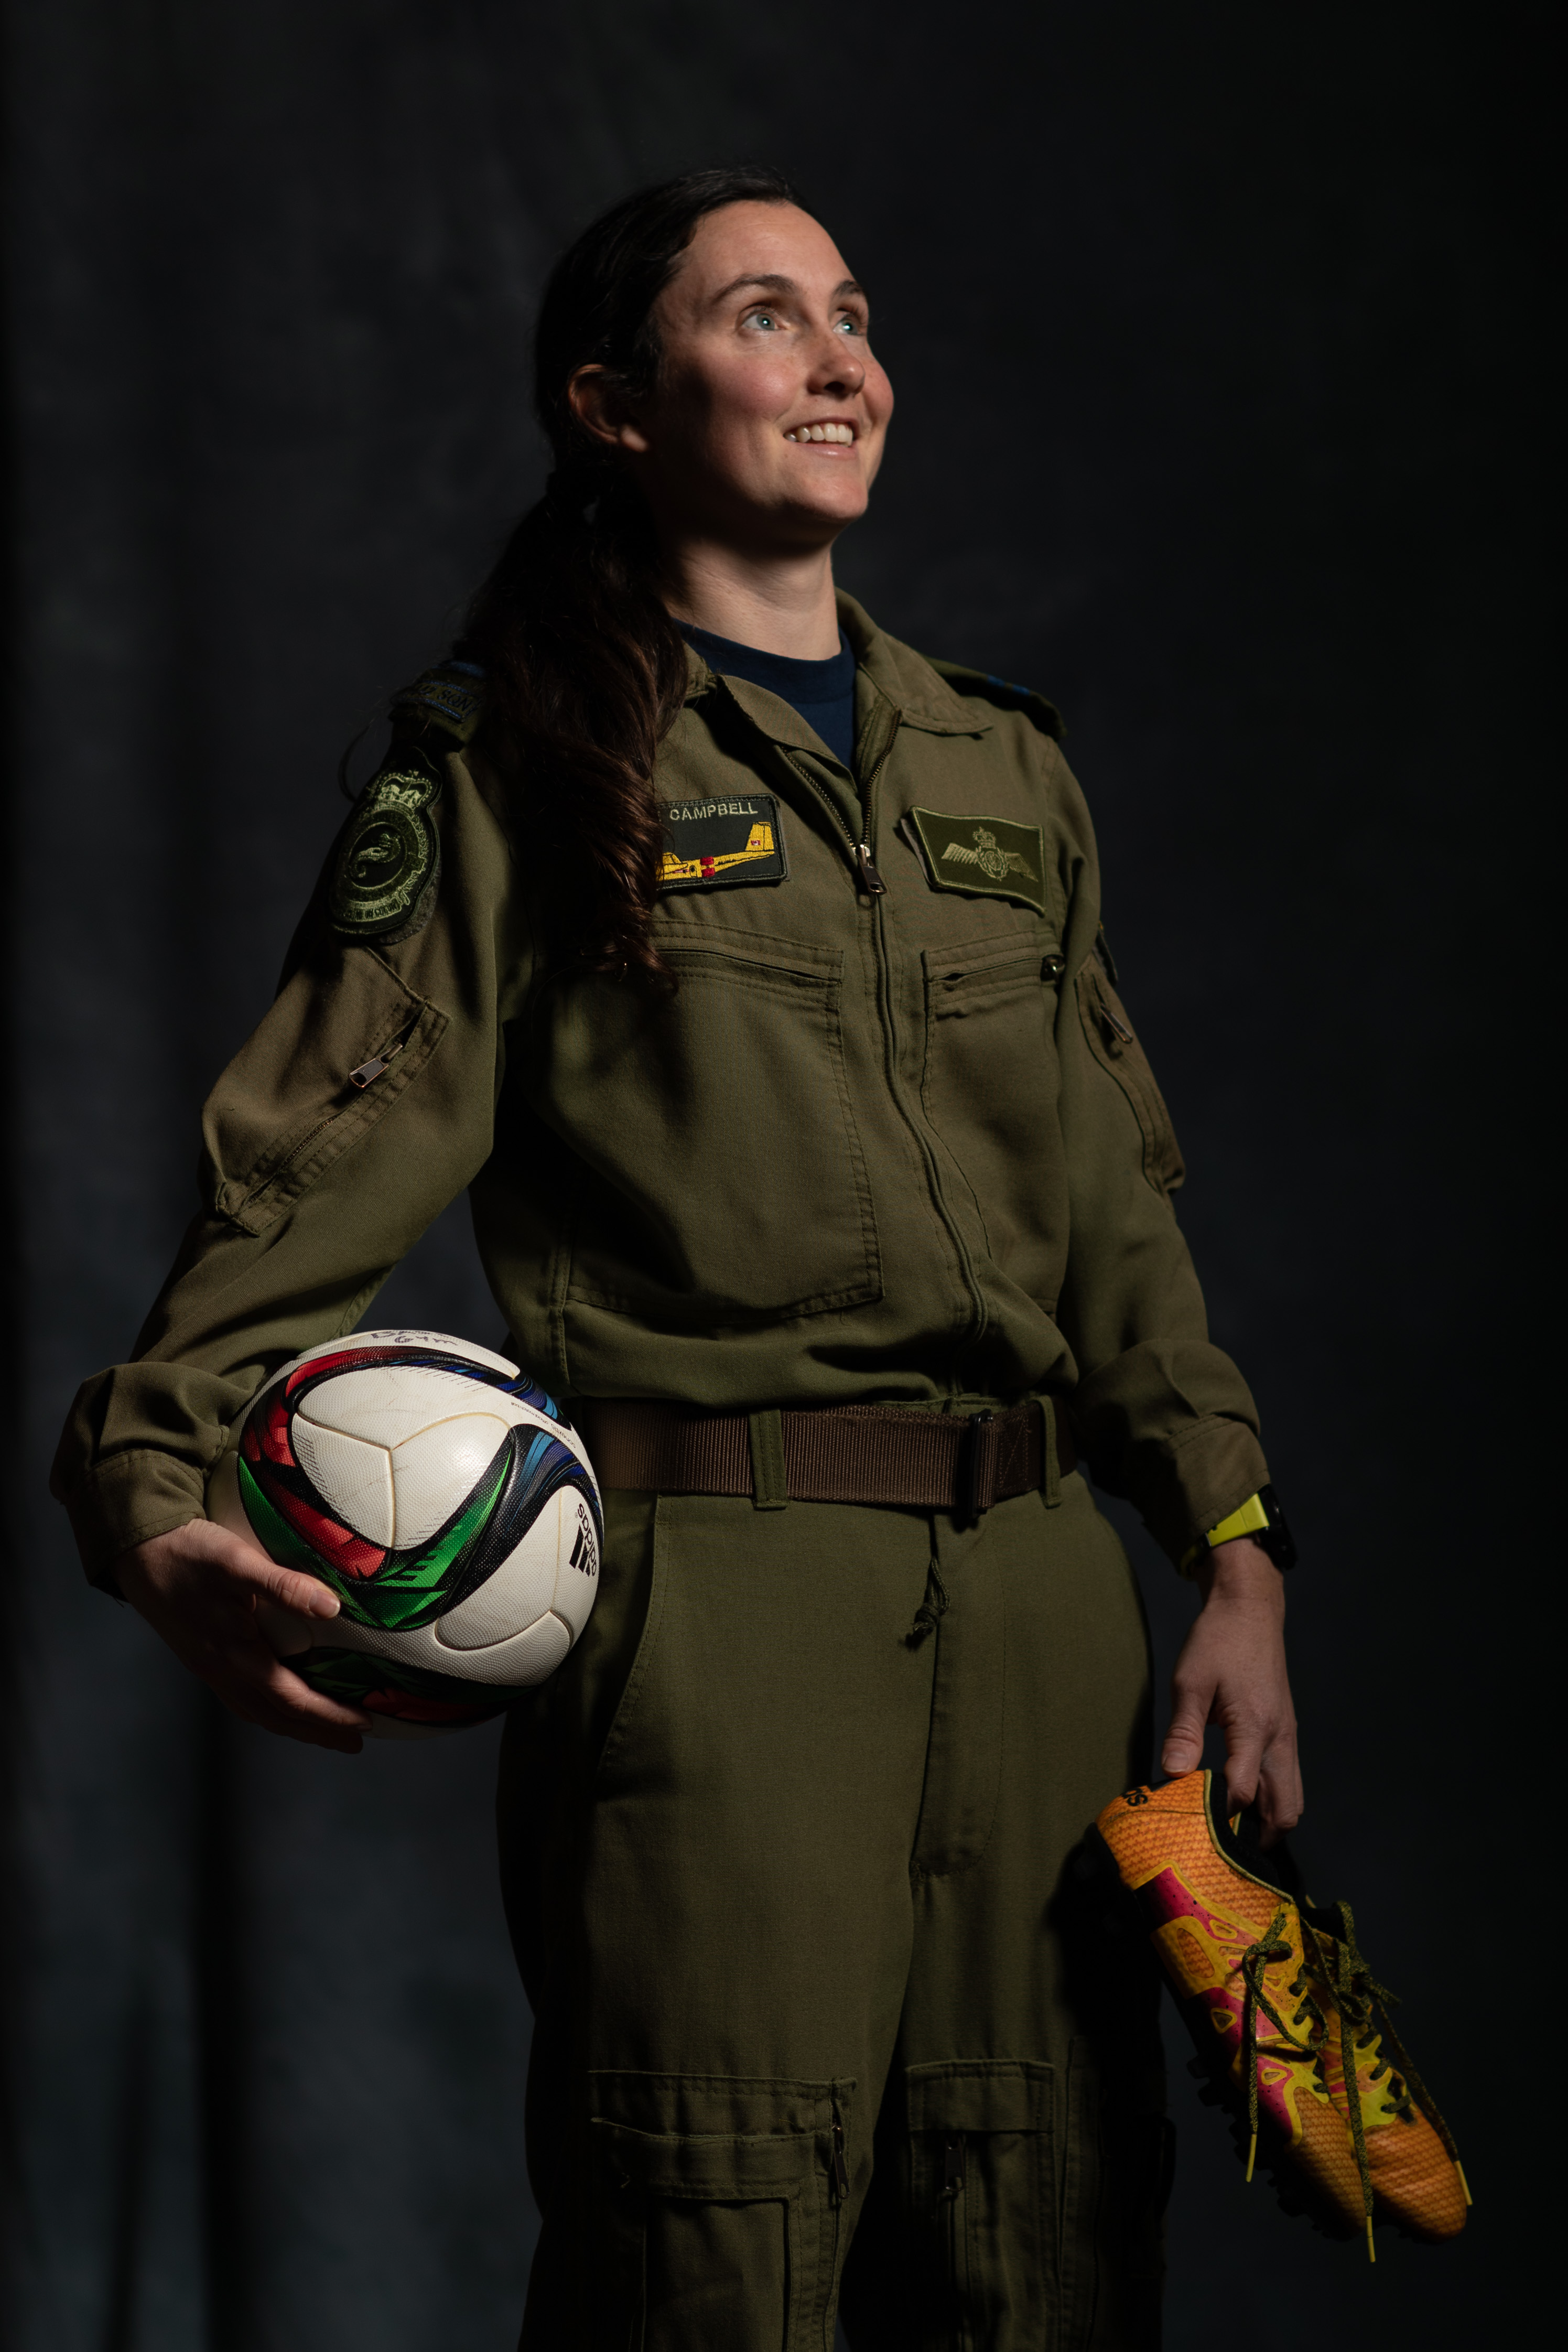 A smiling woman wearing an olive-green flight suit and holding a ball and sports shoes.